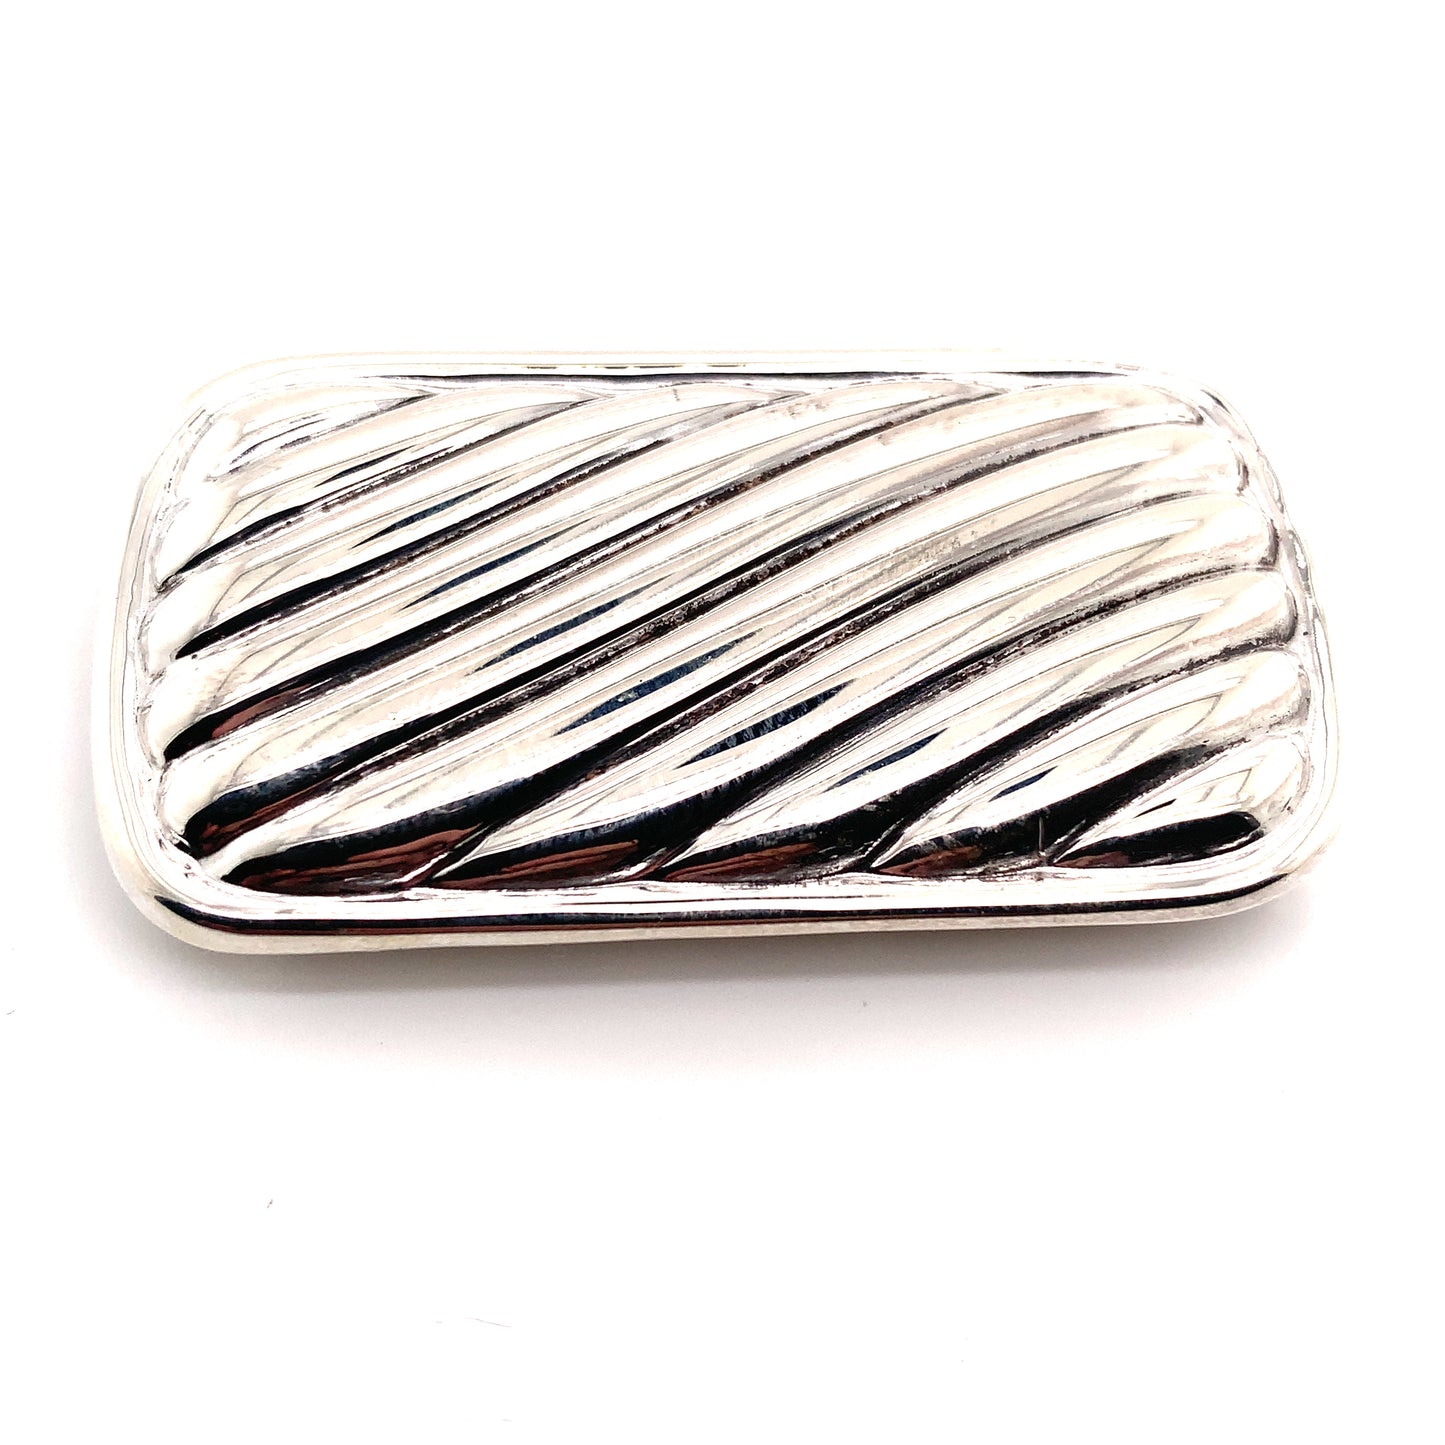 David Yurman Estate Large Cable Money Clip Sterling Silver DY126 - Certified Fine Jewelry